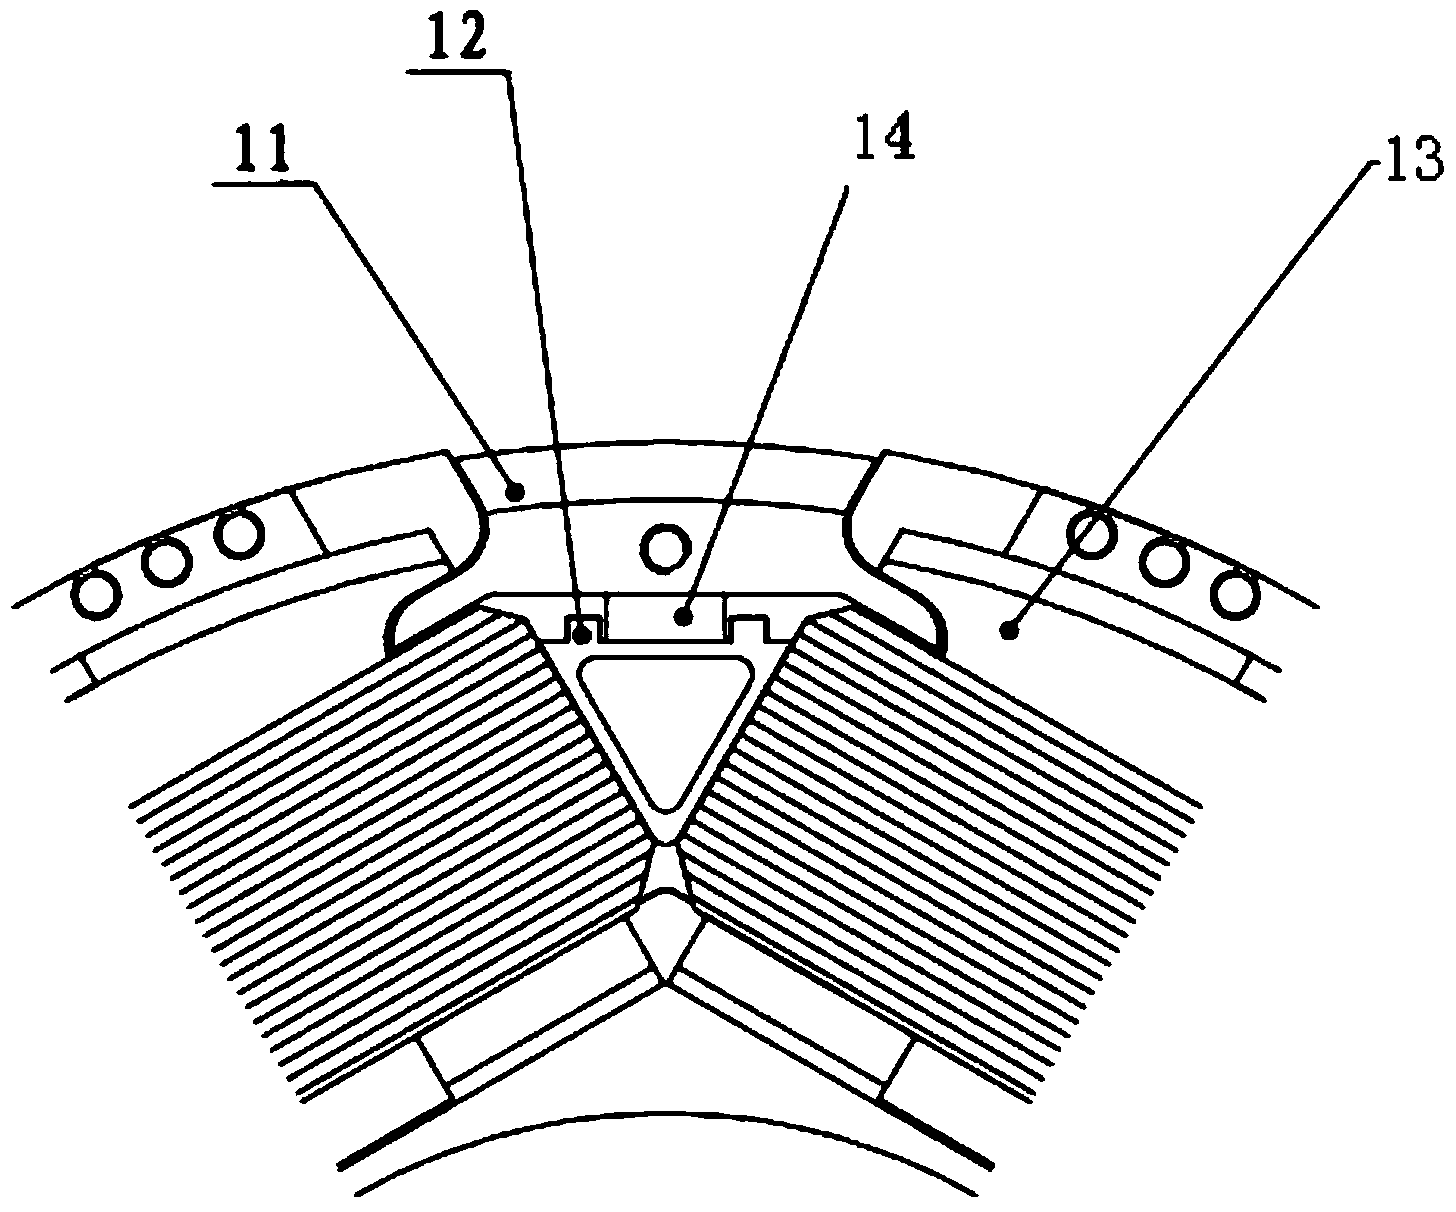 Aviation high-speed generator rotor structure